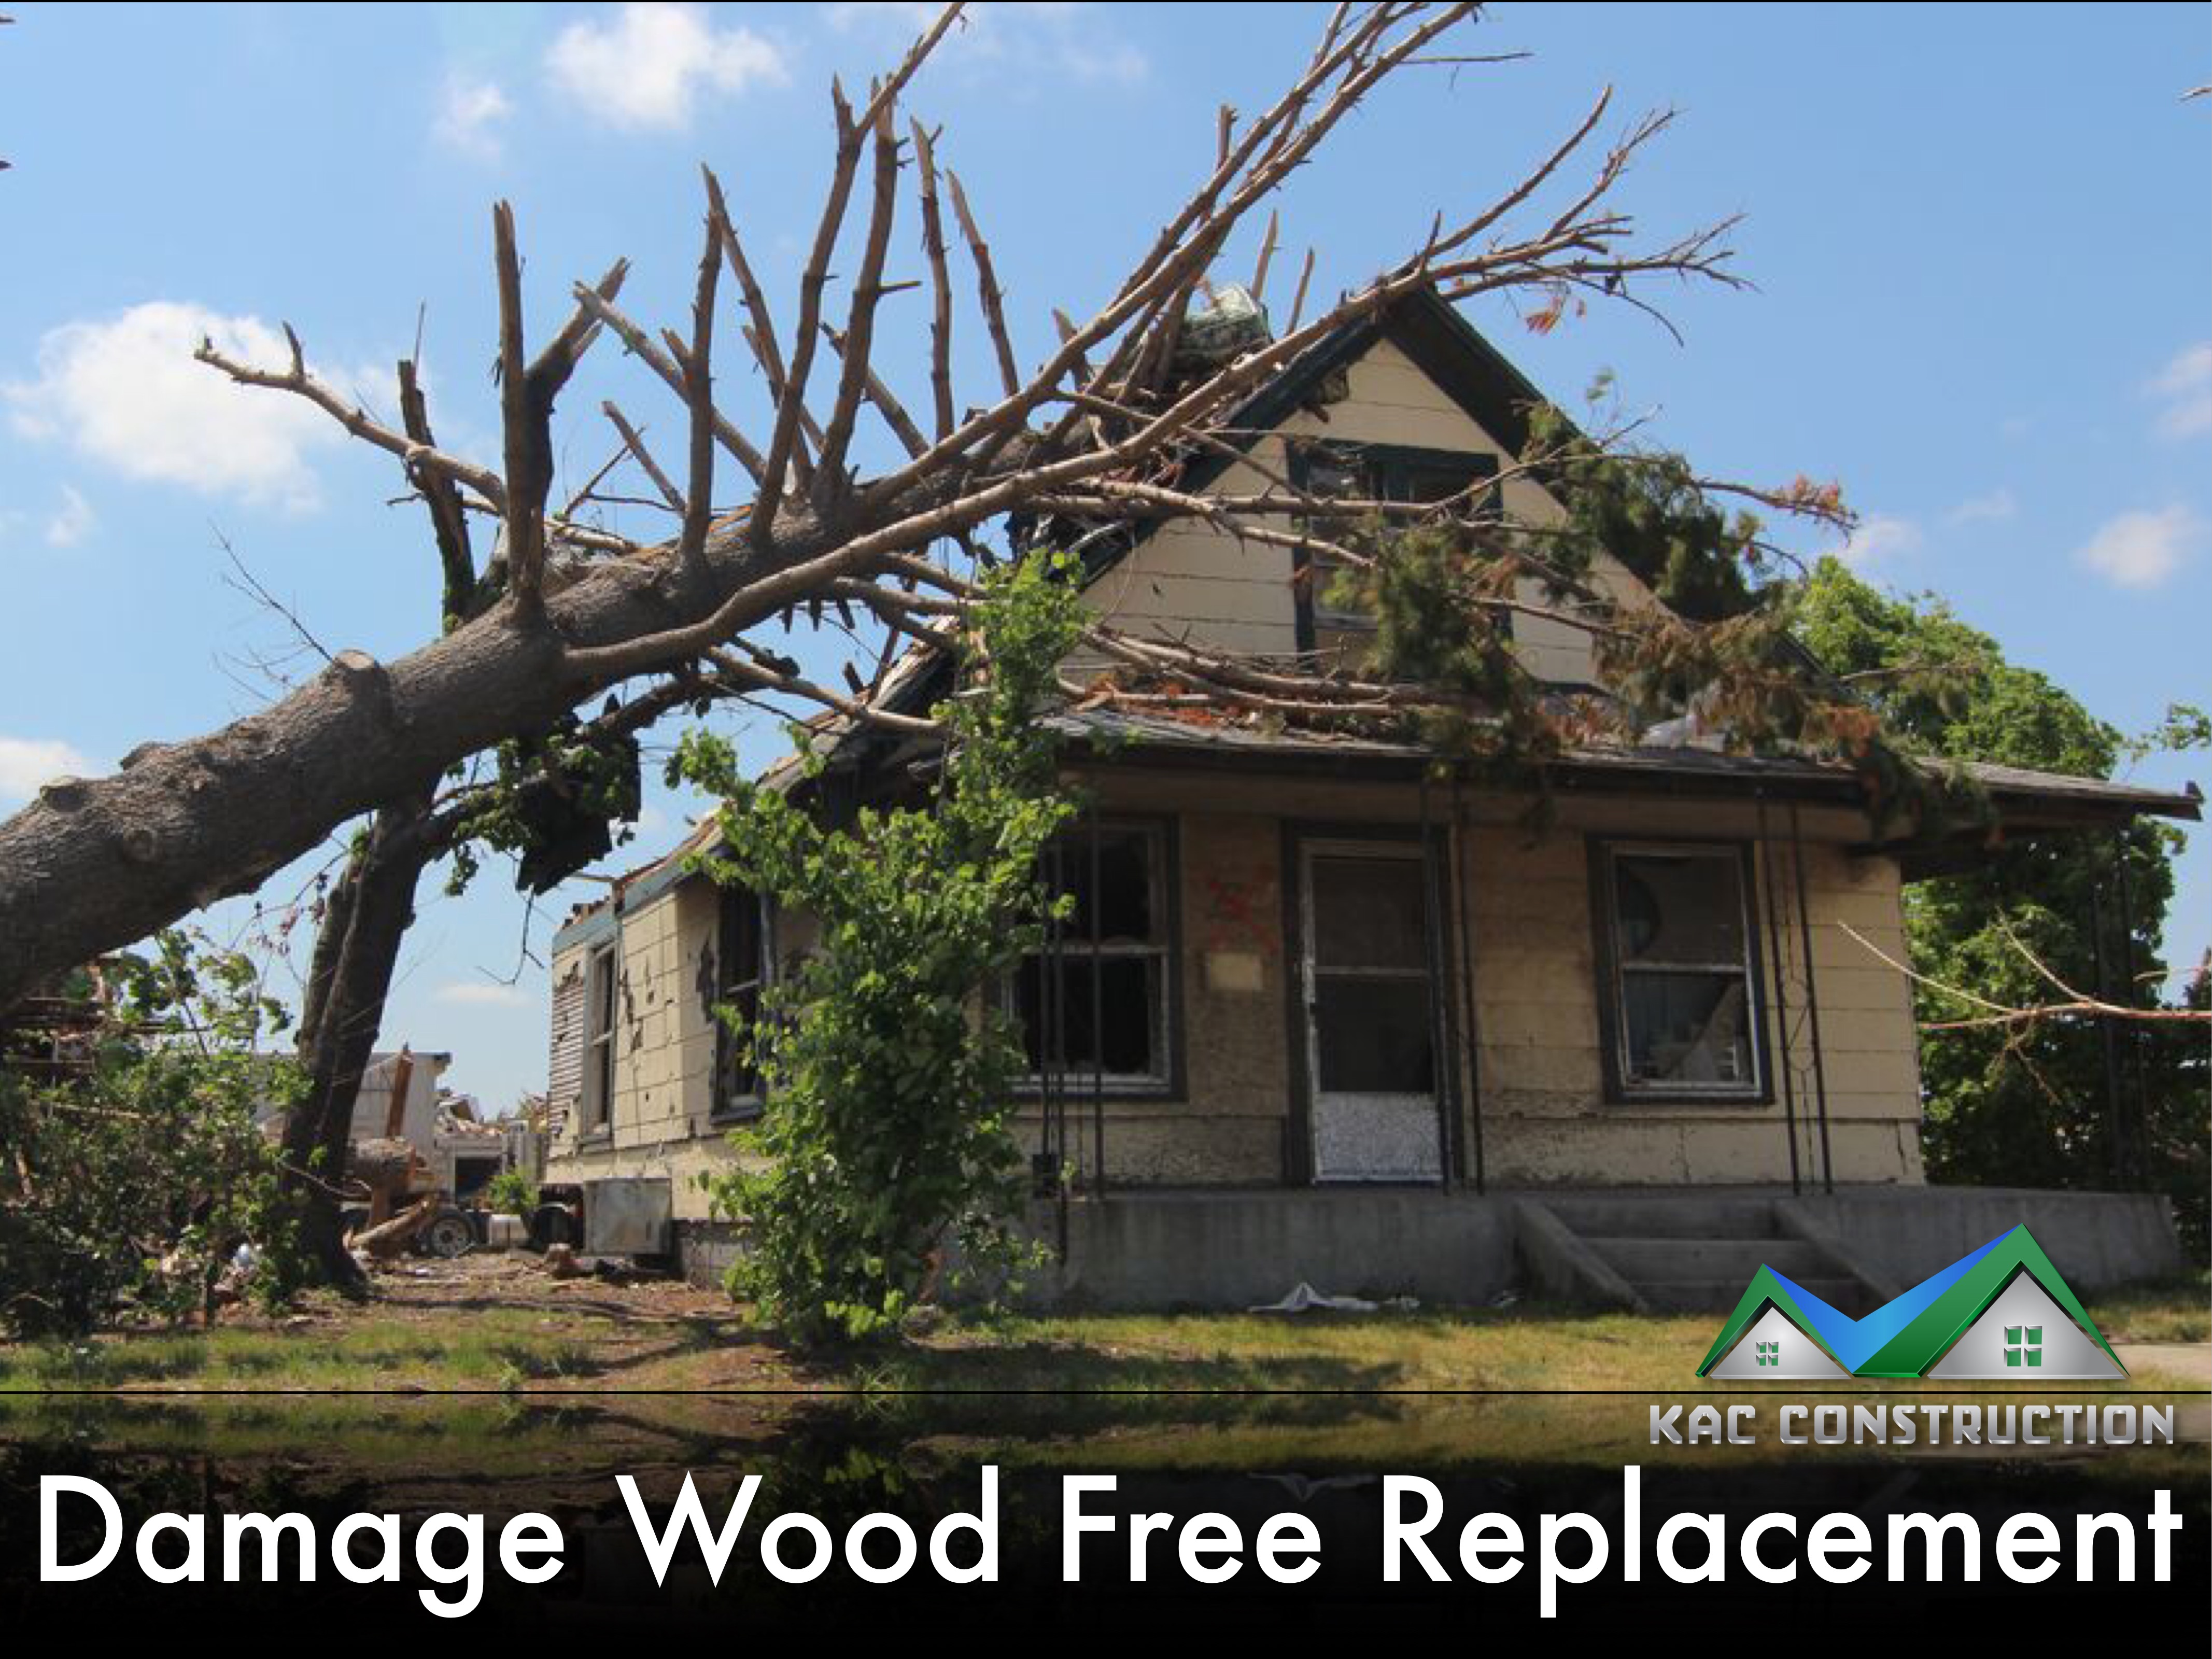 winds damages roof replacement, winds damage roof replacement, winds damaged roof replacement, winds damages roof replacement ct, winds damages roof replacement new london, winds damages rof, winds damages roof replacement in ct